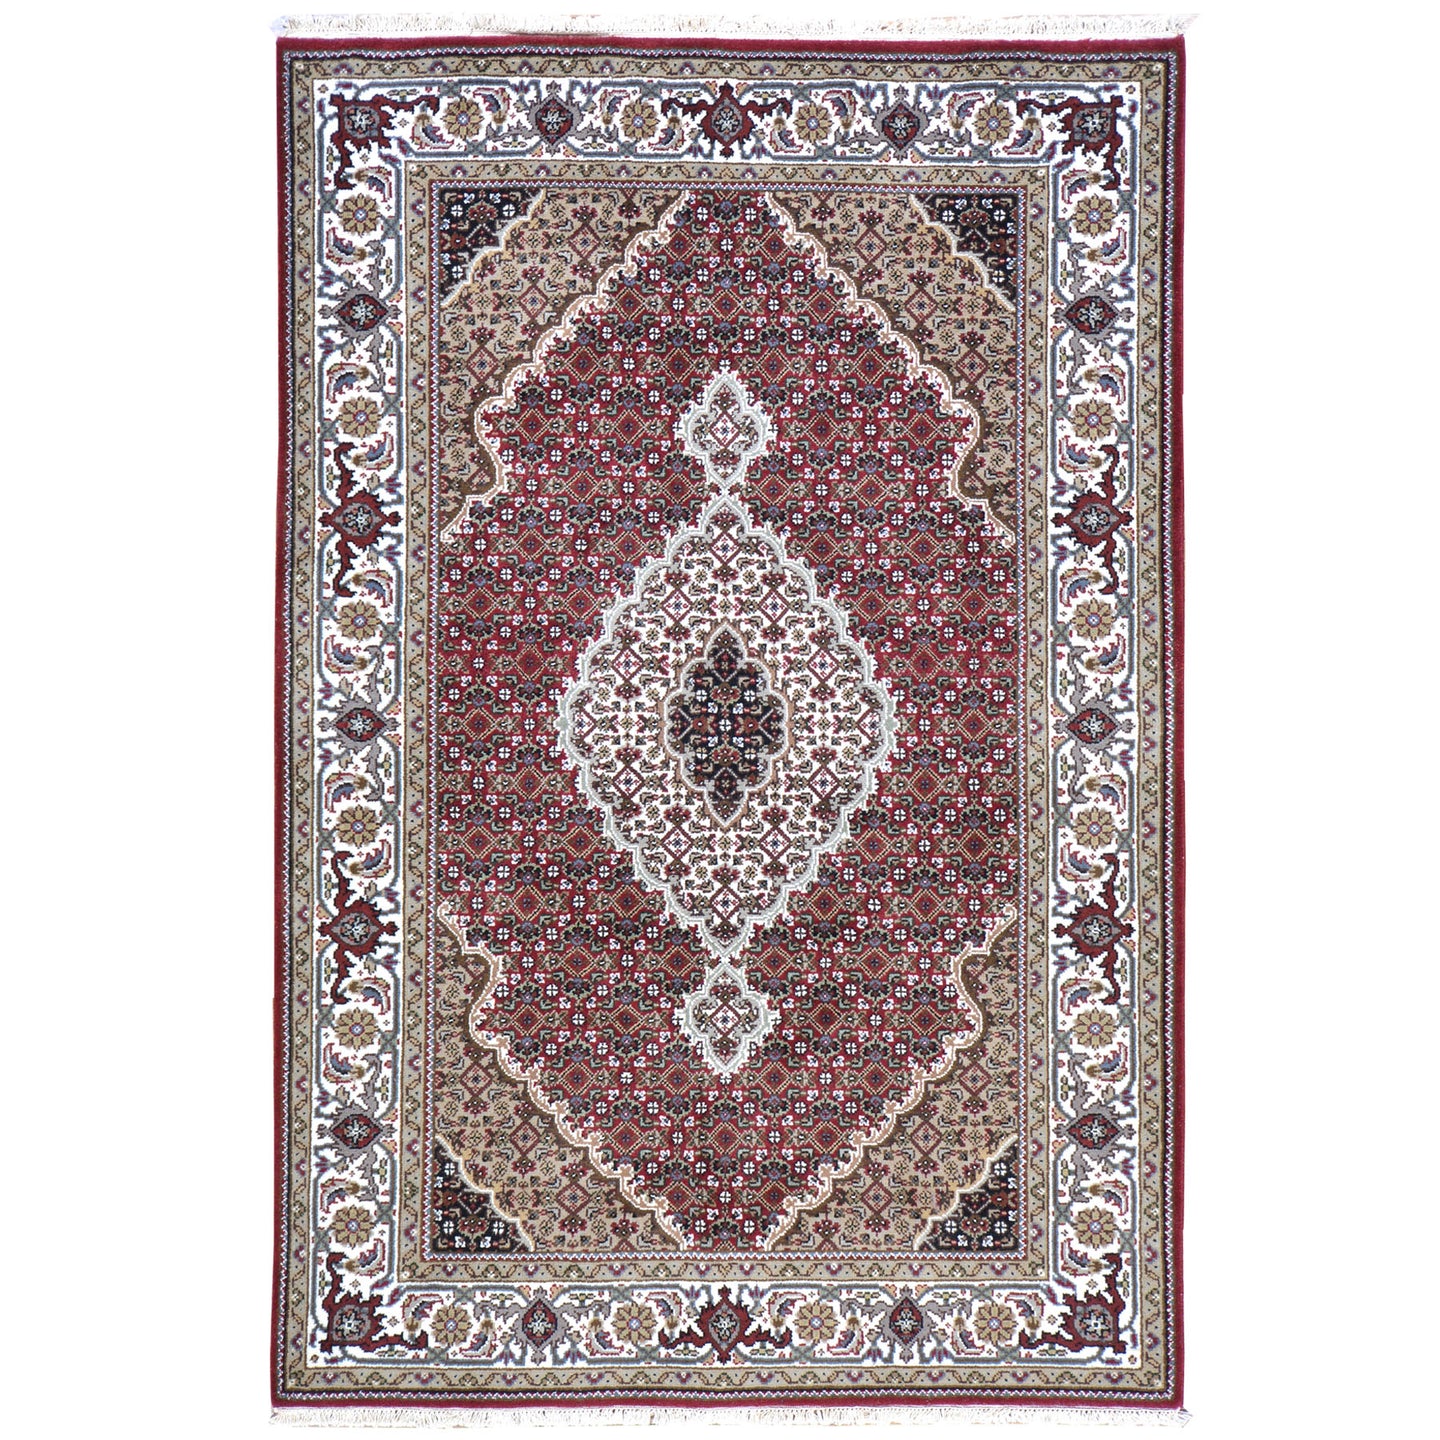 Oriental rugs, hand-knotted carpets, sustainable rugs, classic world oriental rugs, handmade, United States, interior design,  Brral-4695